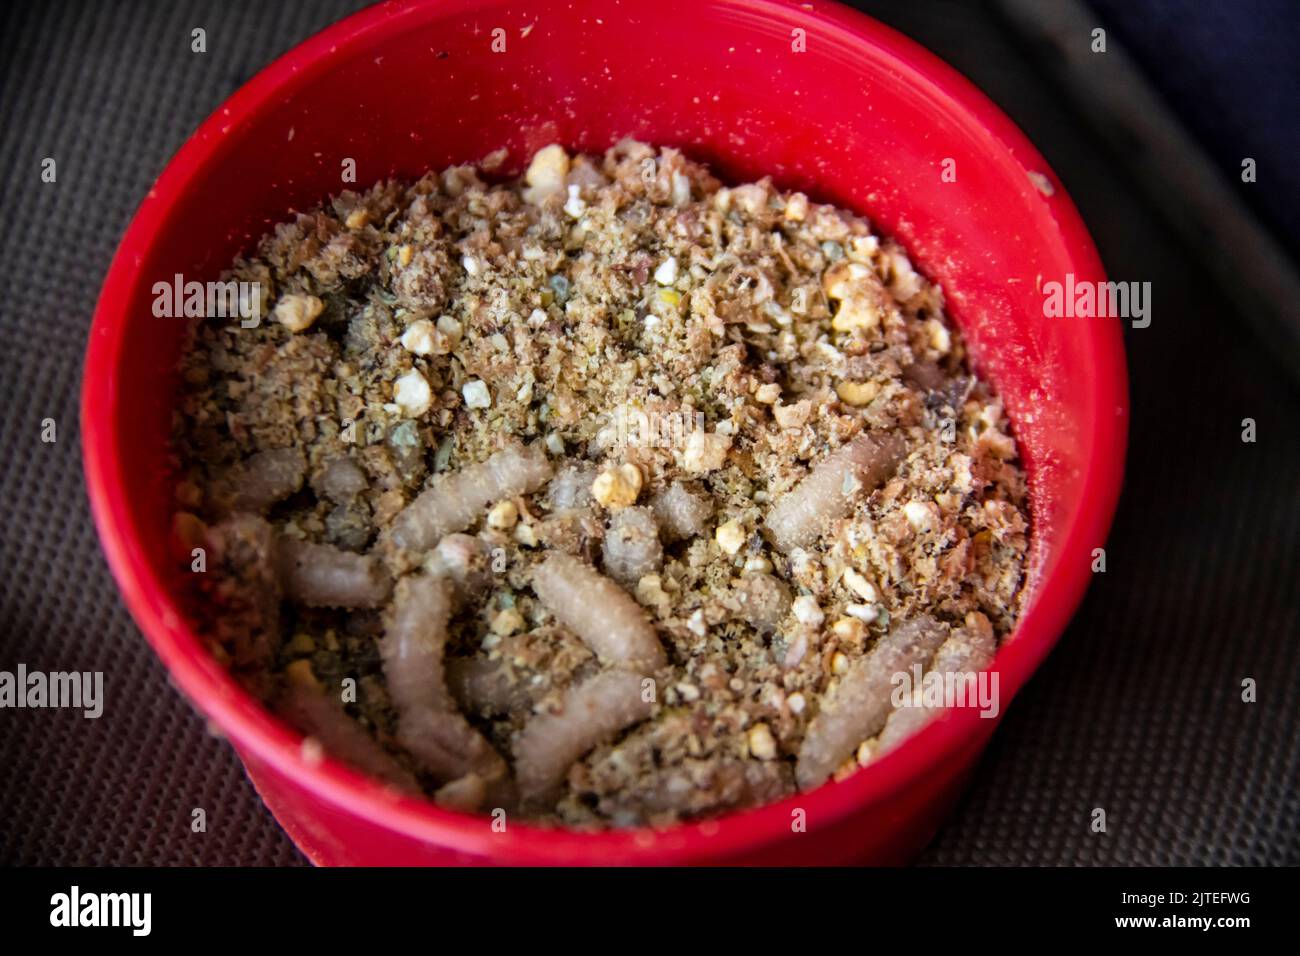 Live fly larvae in the red plastic plate as bait for catching fish. The maggots for fishing against background Stock Photo